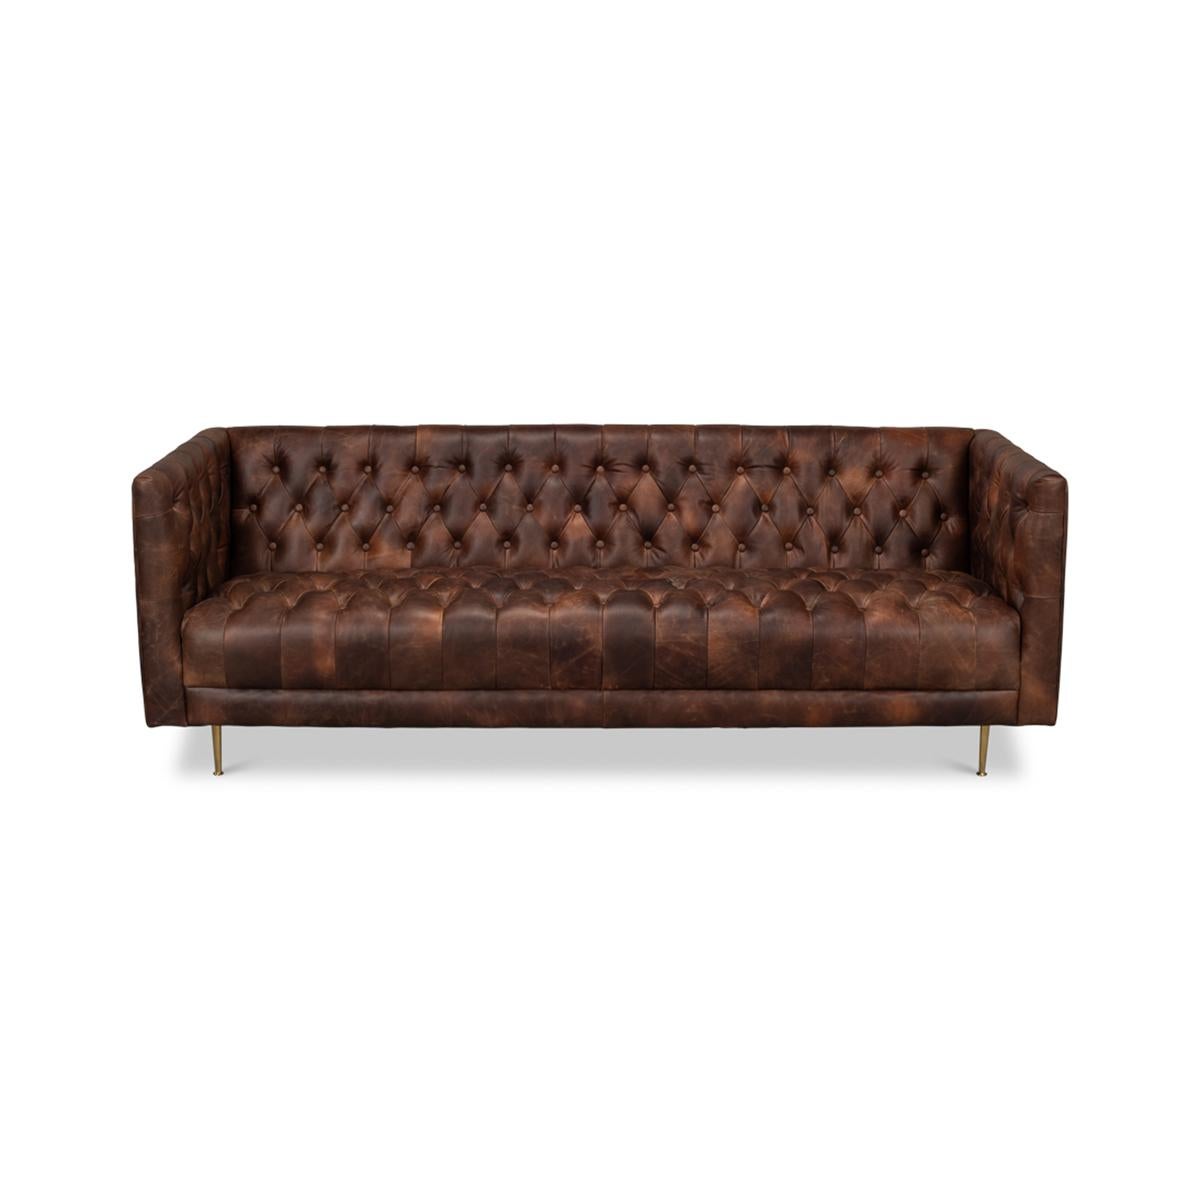 Mid-century tufted leather sofa, covered in a beautiful brown traditional top grain leather, mounted on metal legs and scaled to perfection.

Dimensions: 82